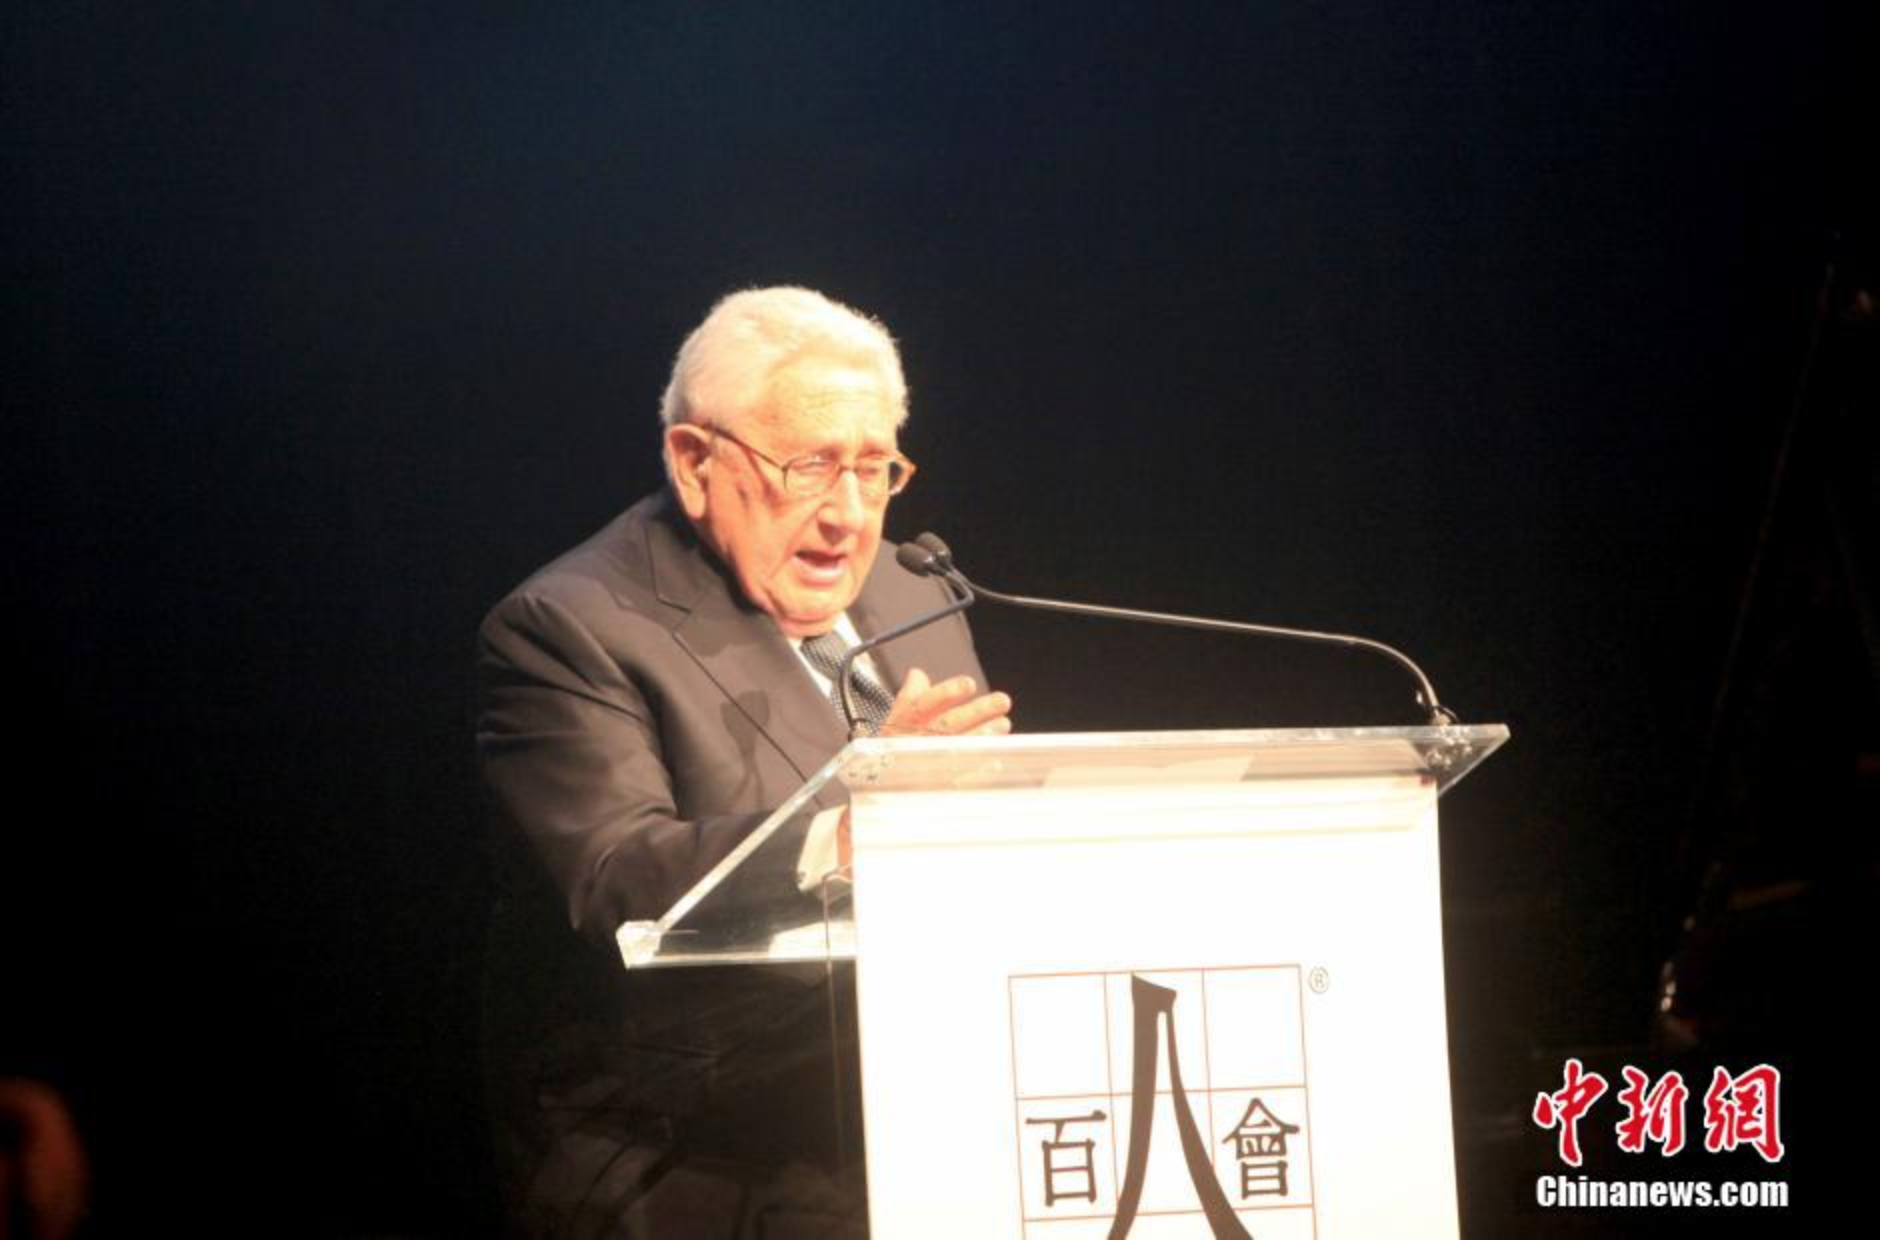 Henry Kissinger Attended High Level Chinese American Organization the Committee of 100’s Ceremony and Gave a Speech